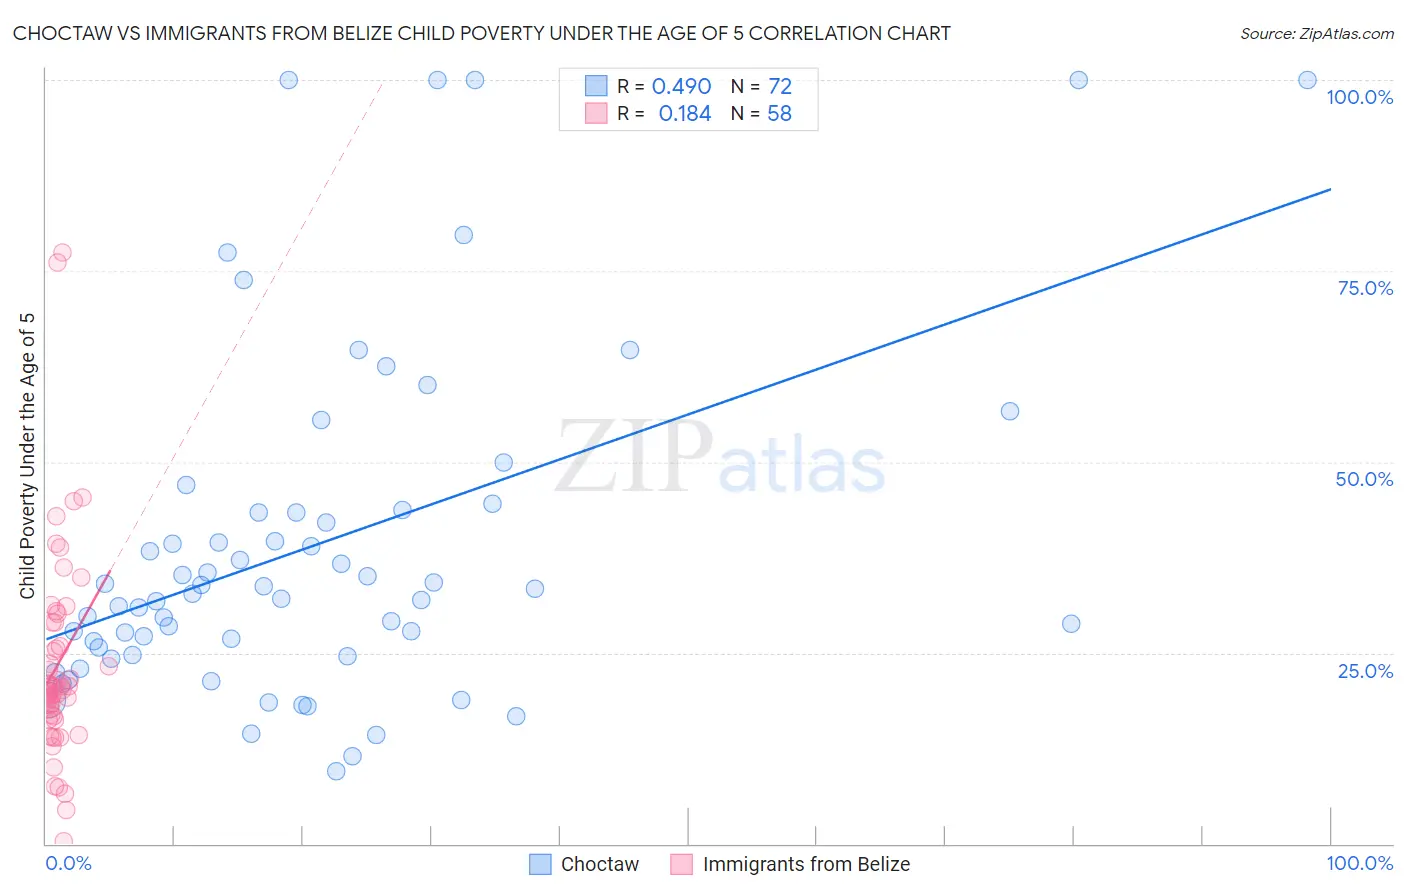 Choctaw vs Immigrants from Belize Child Poverty Under the Age of 5